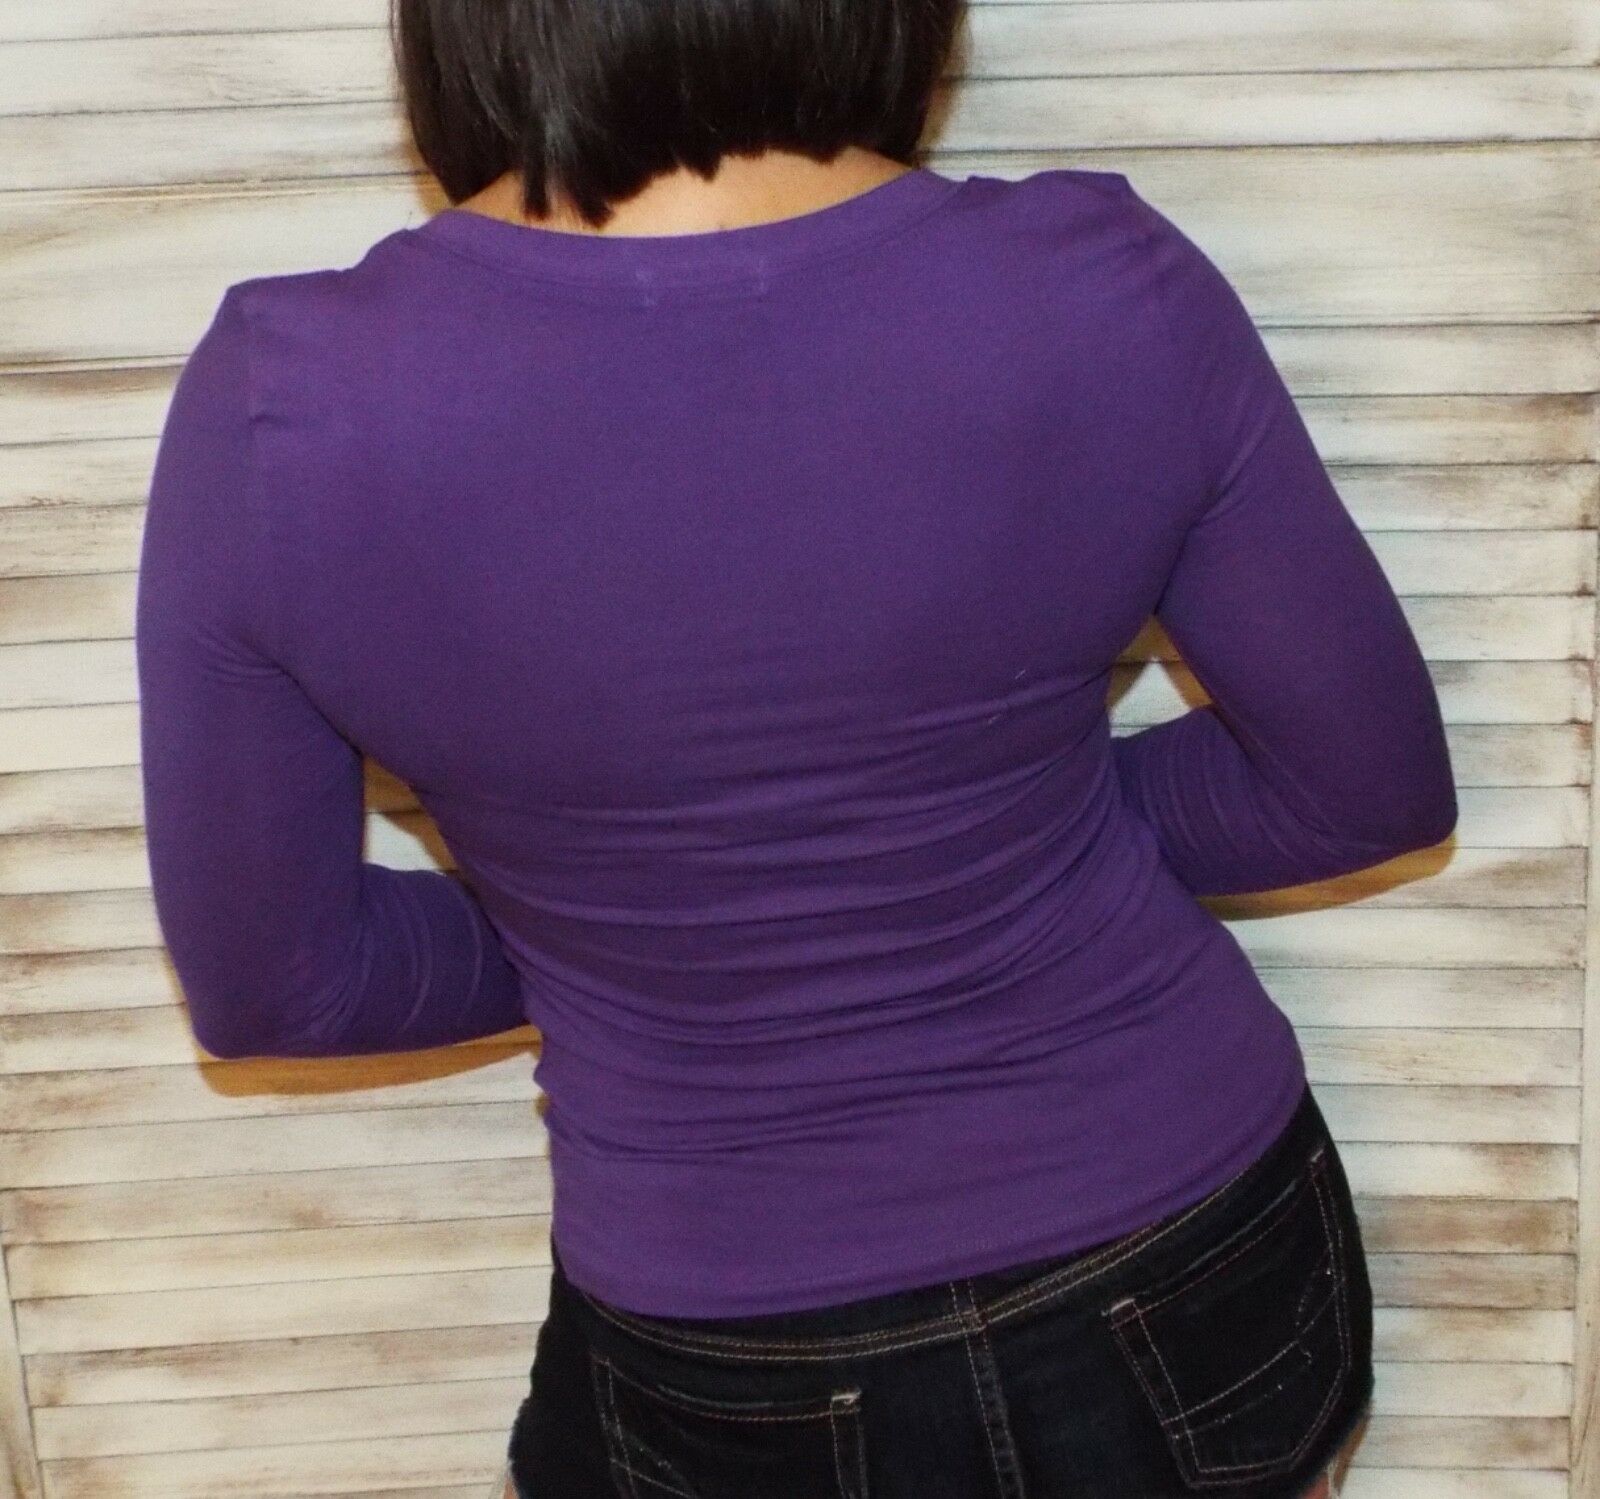 “Easygoing” Slimming Scoop Neck Low Cut L/S Tissue Basic Baby Shirt Top Purple S/M/L